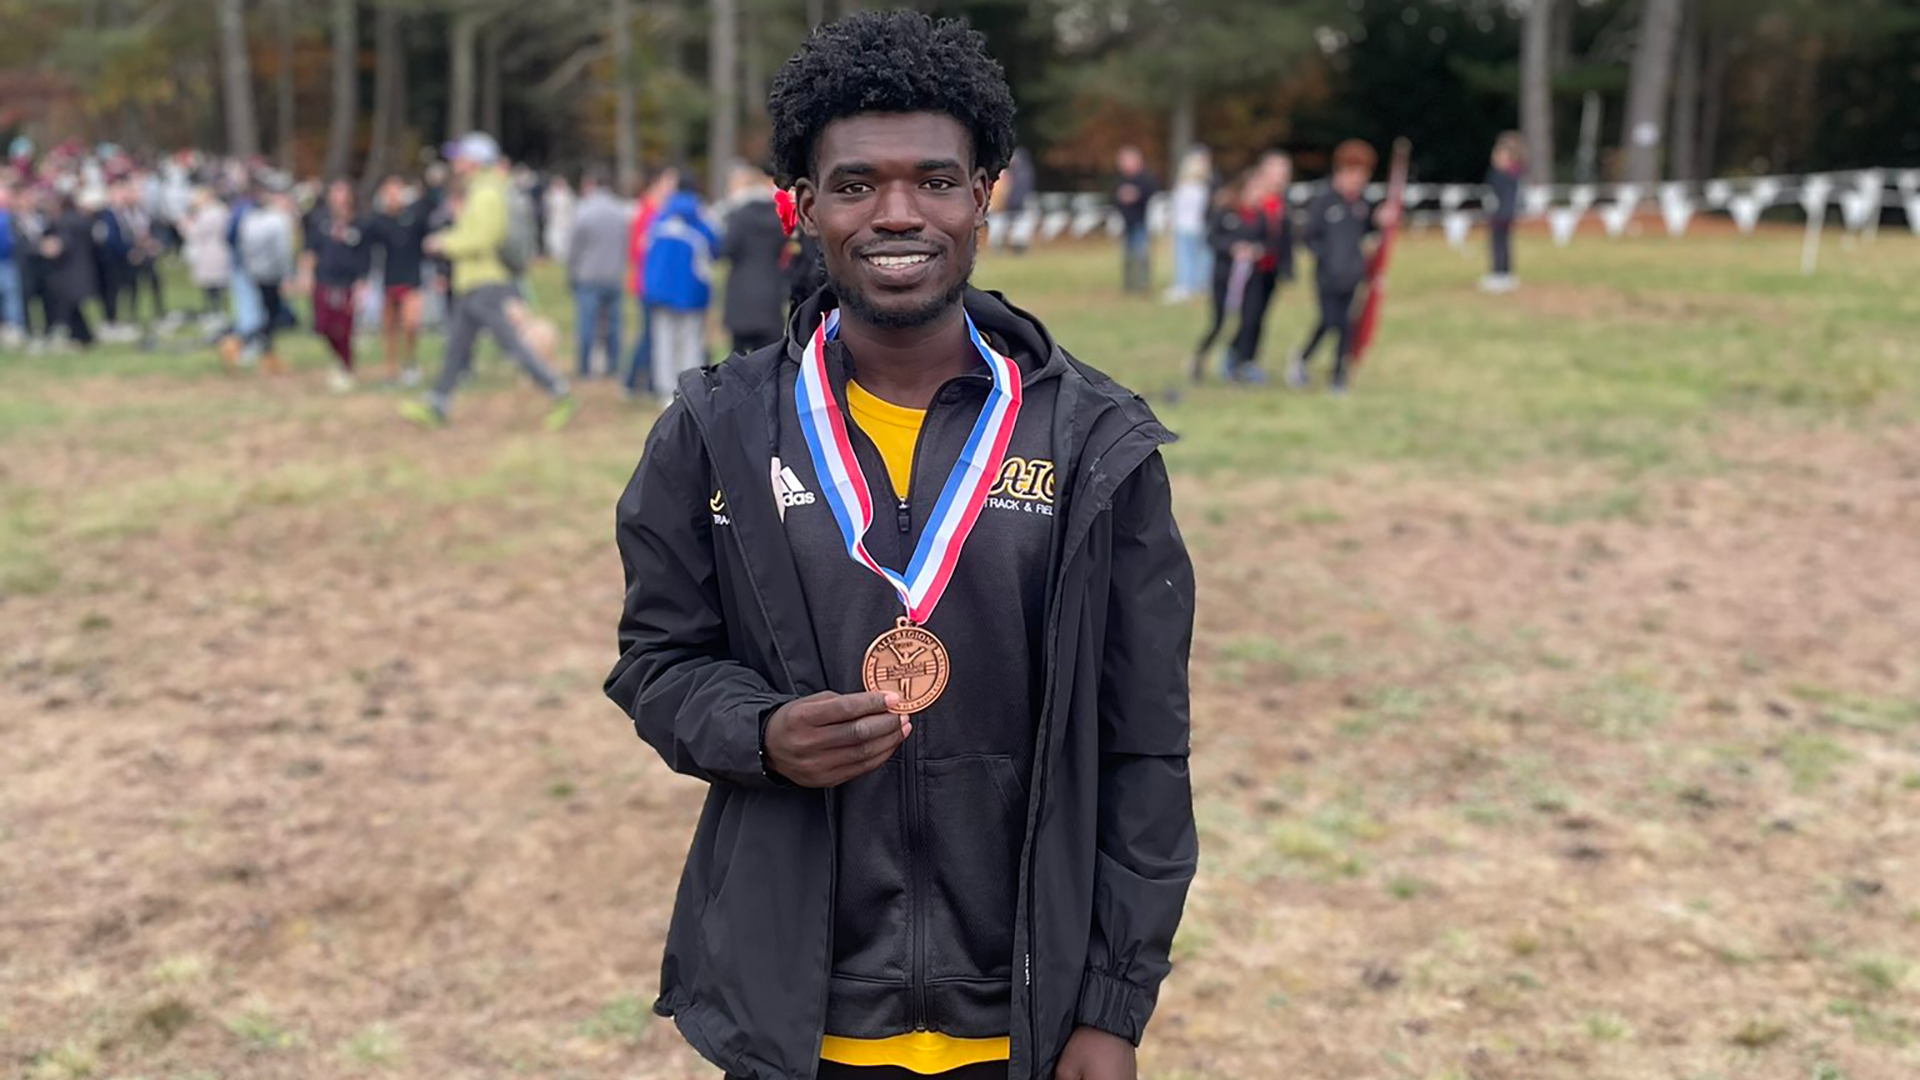 Sadadine Adam qualifies for Cross Country Nationals with 10th-place finish at East Regional